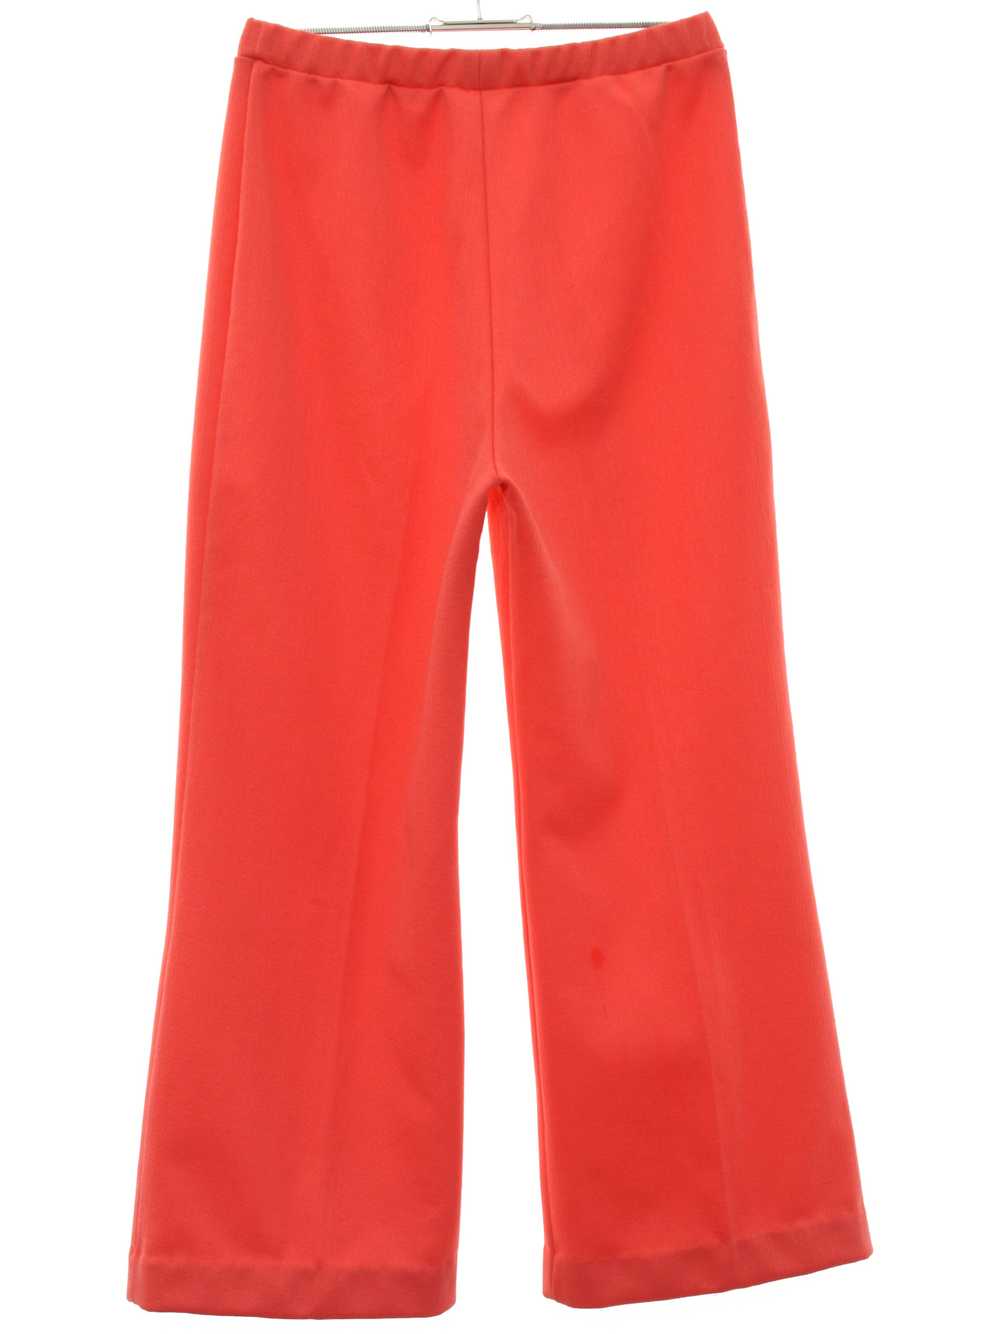 1970's Womens Flared Knit Pants - image 3